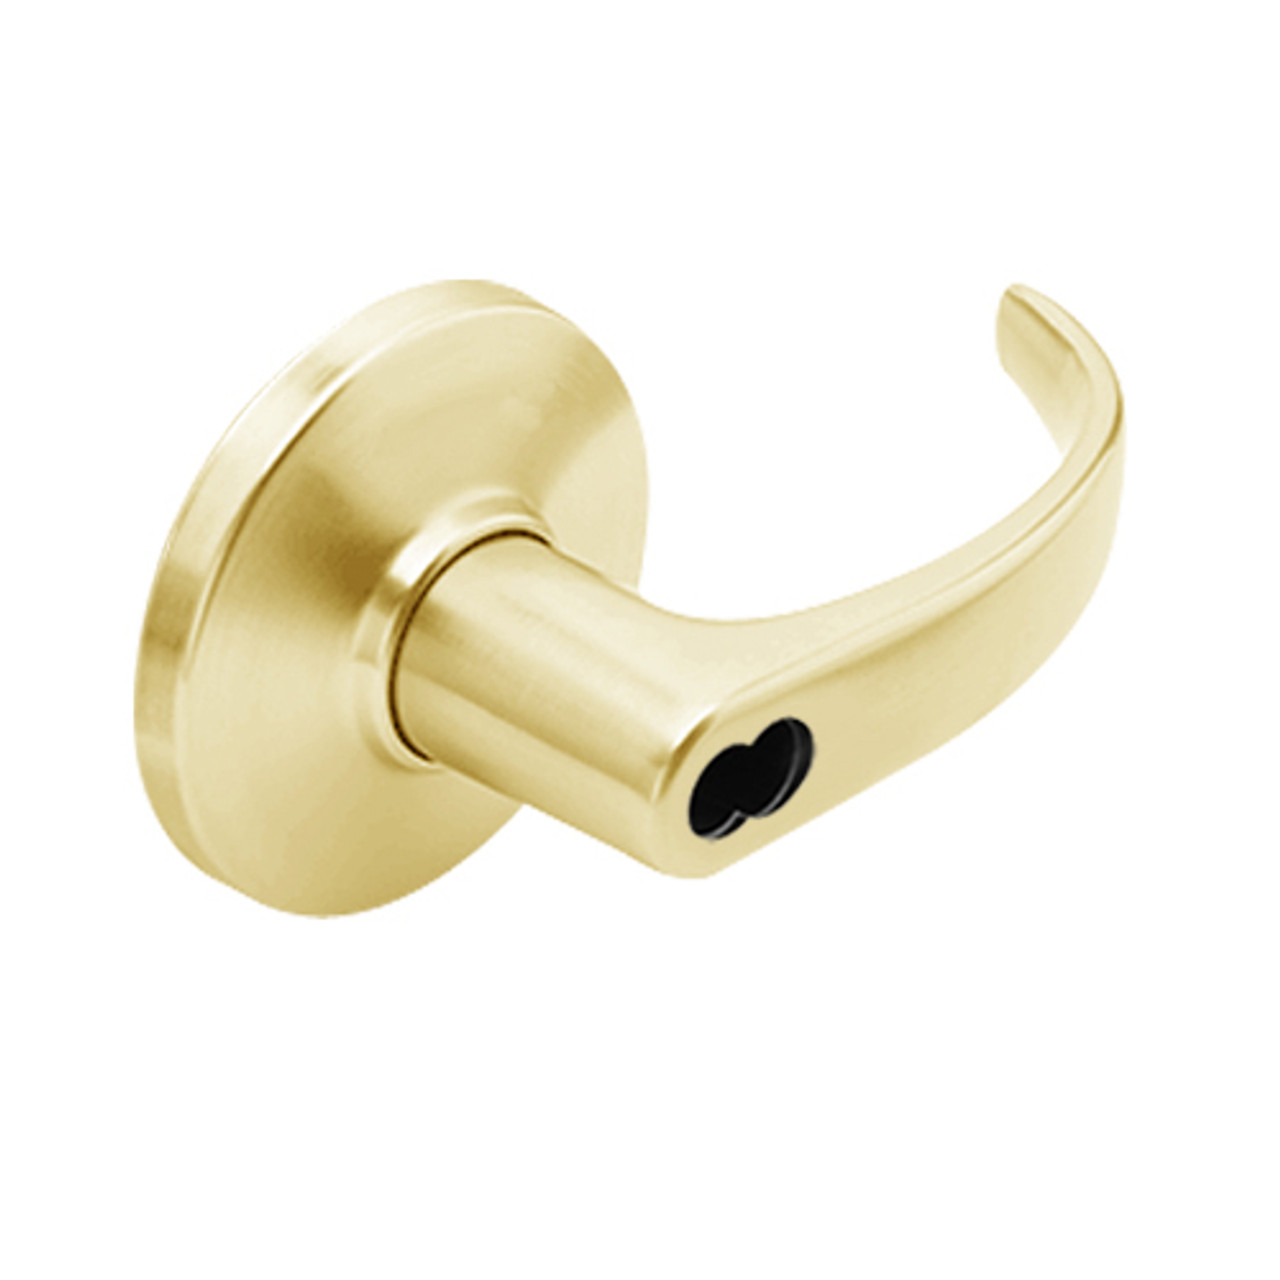 9K37XR14DSTK605 Best 9K Series Special Function Cylindrical Lever Locks with Curved with Return Lever Design Accept 7 Pin Best Core in Bright Brass